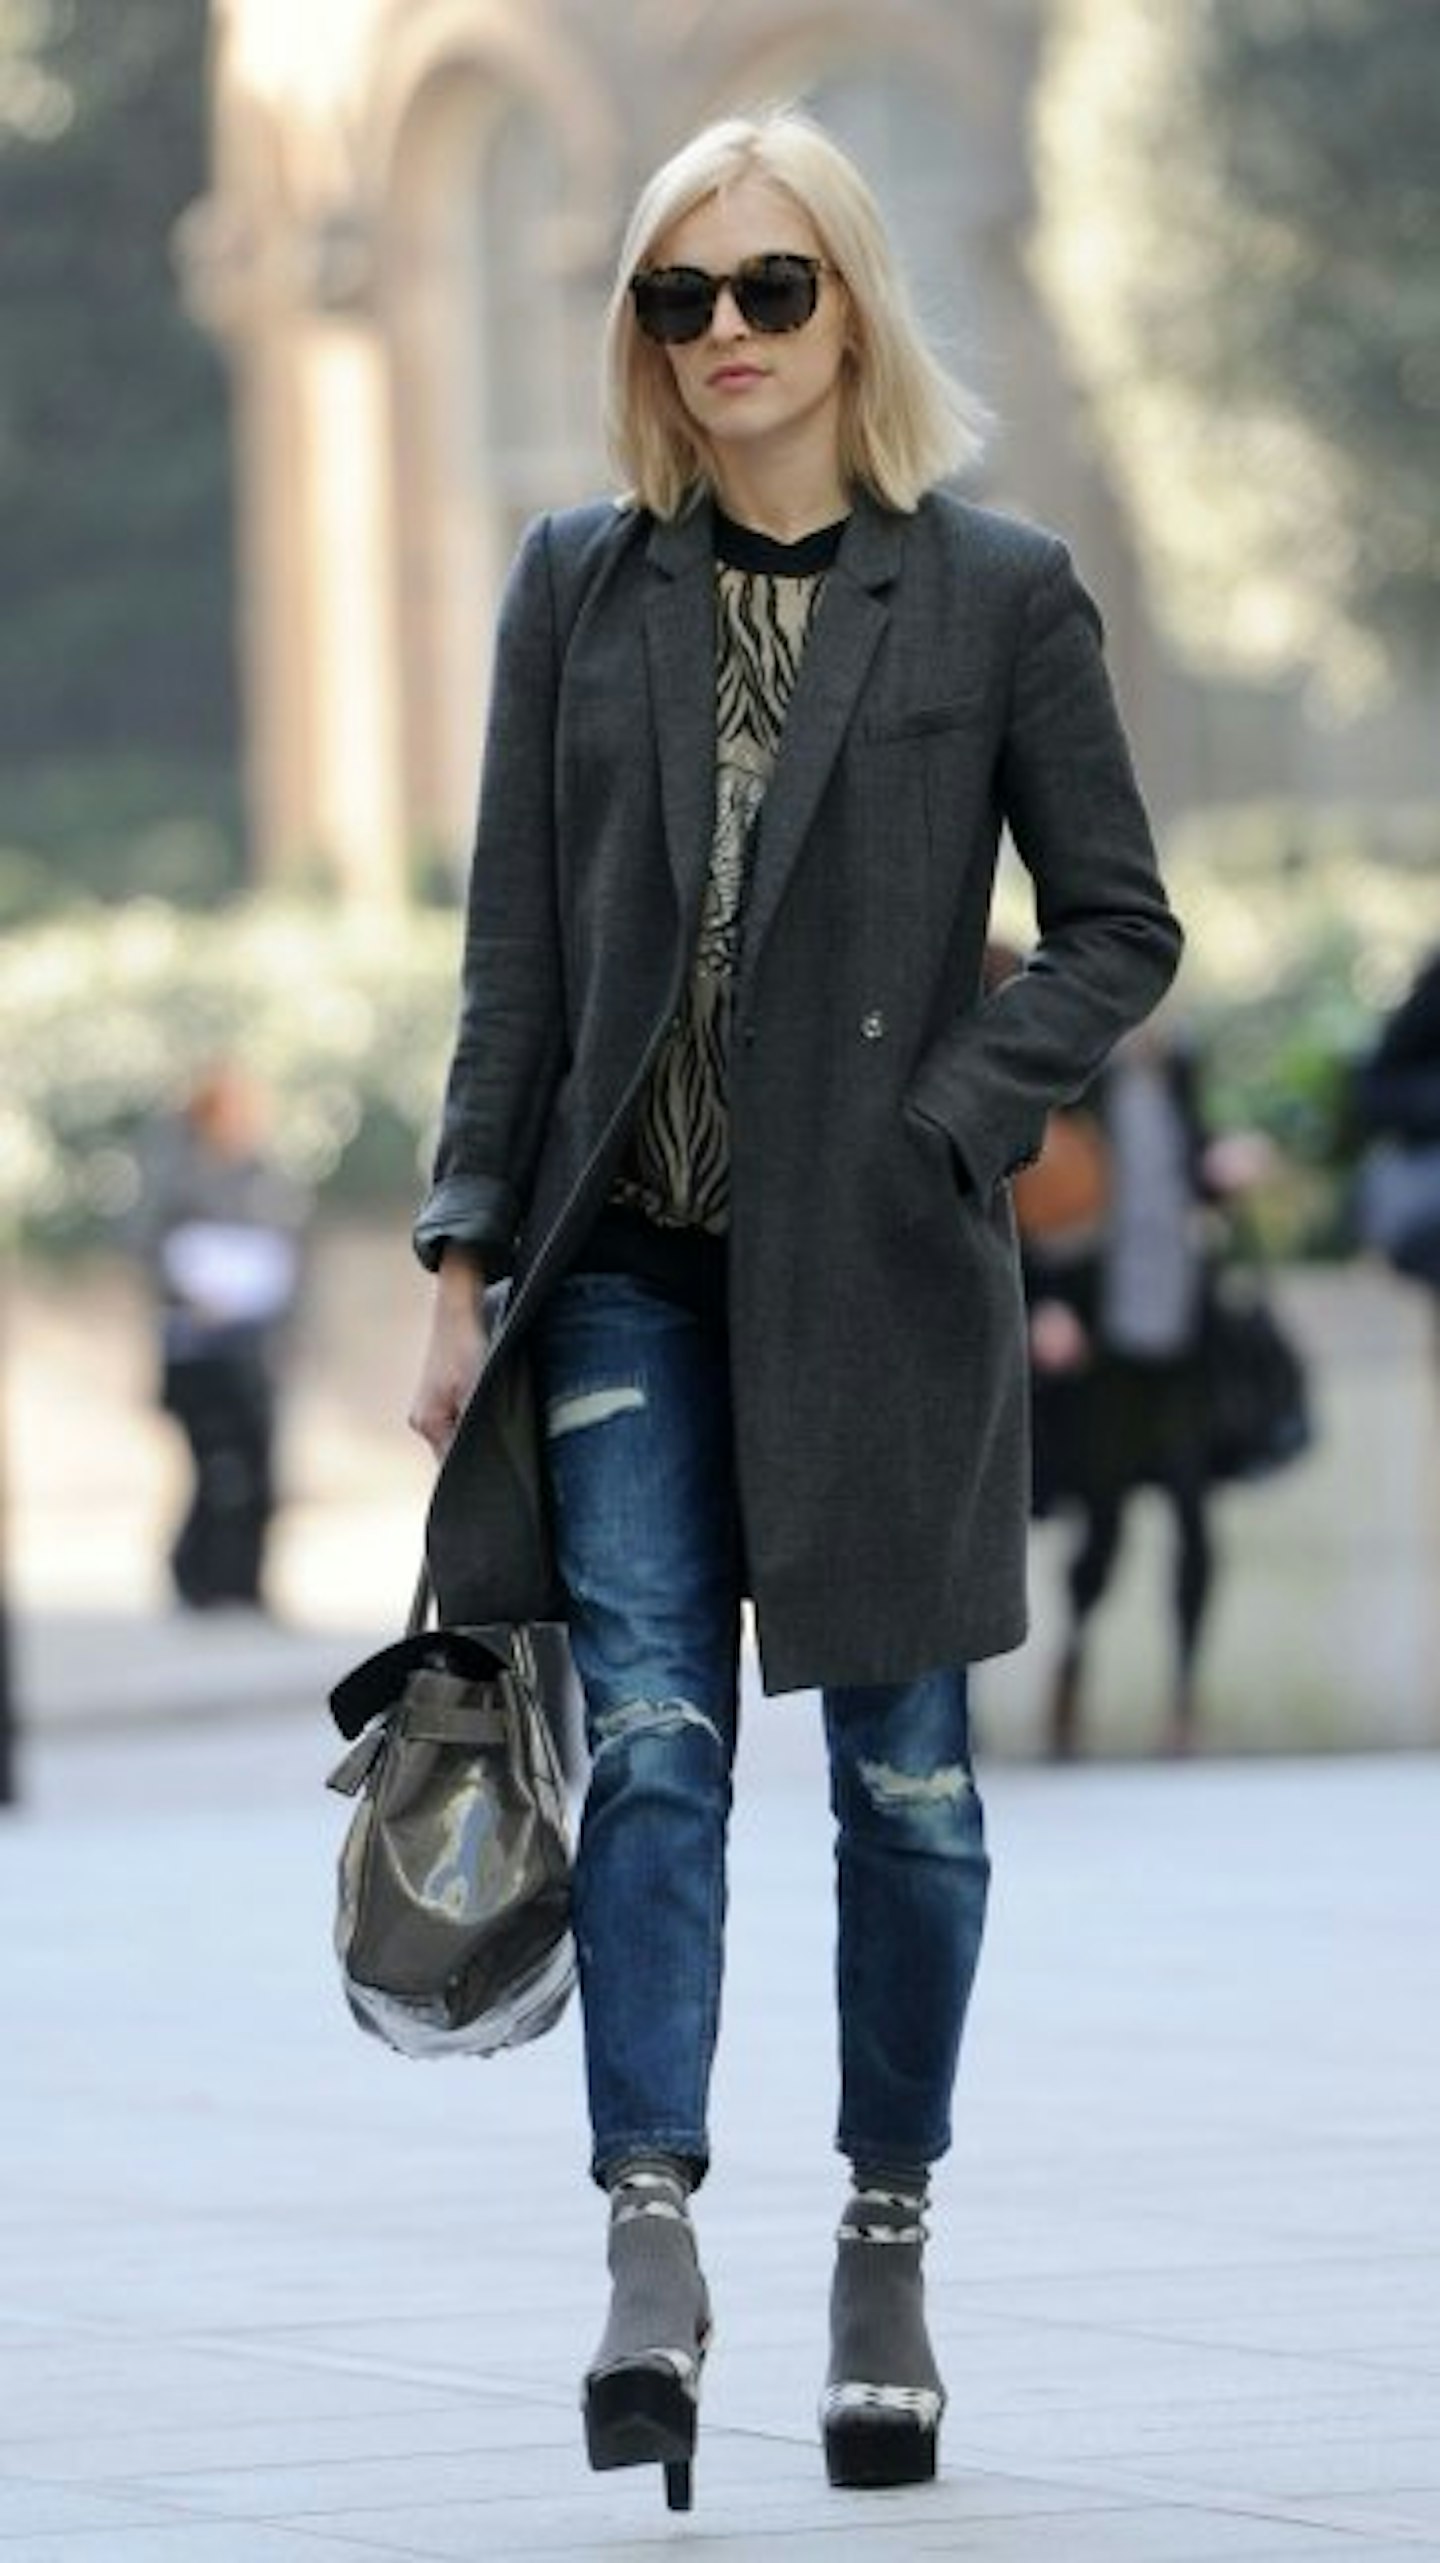 Fearne finished off her denim and grey combo with chunky platform heels recently.